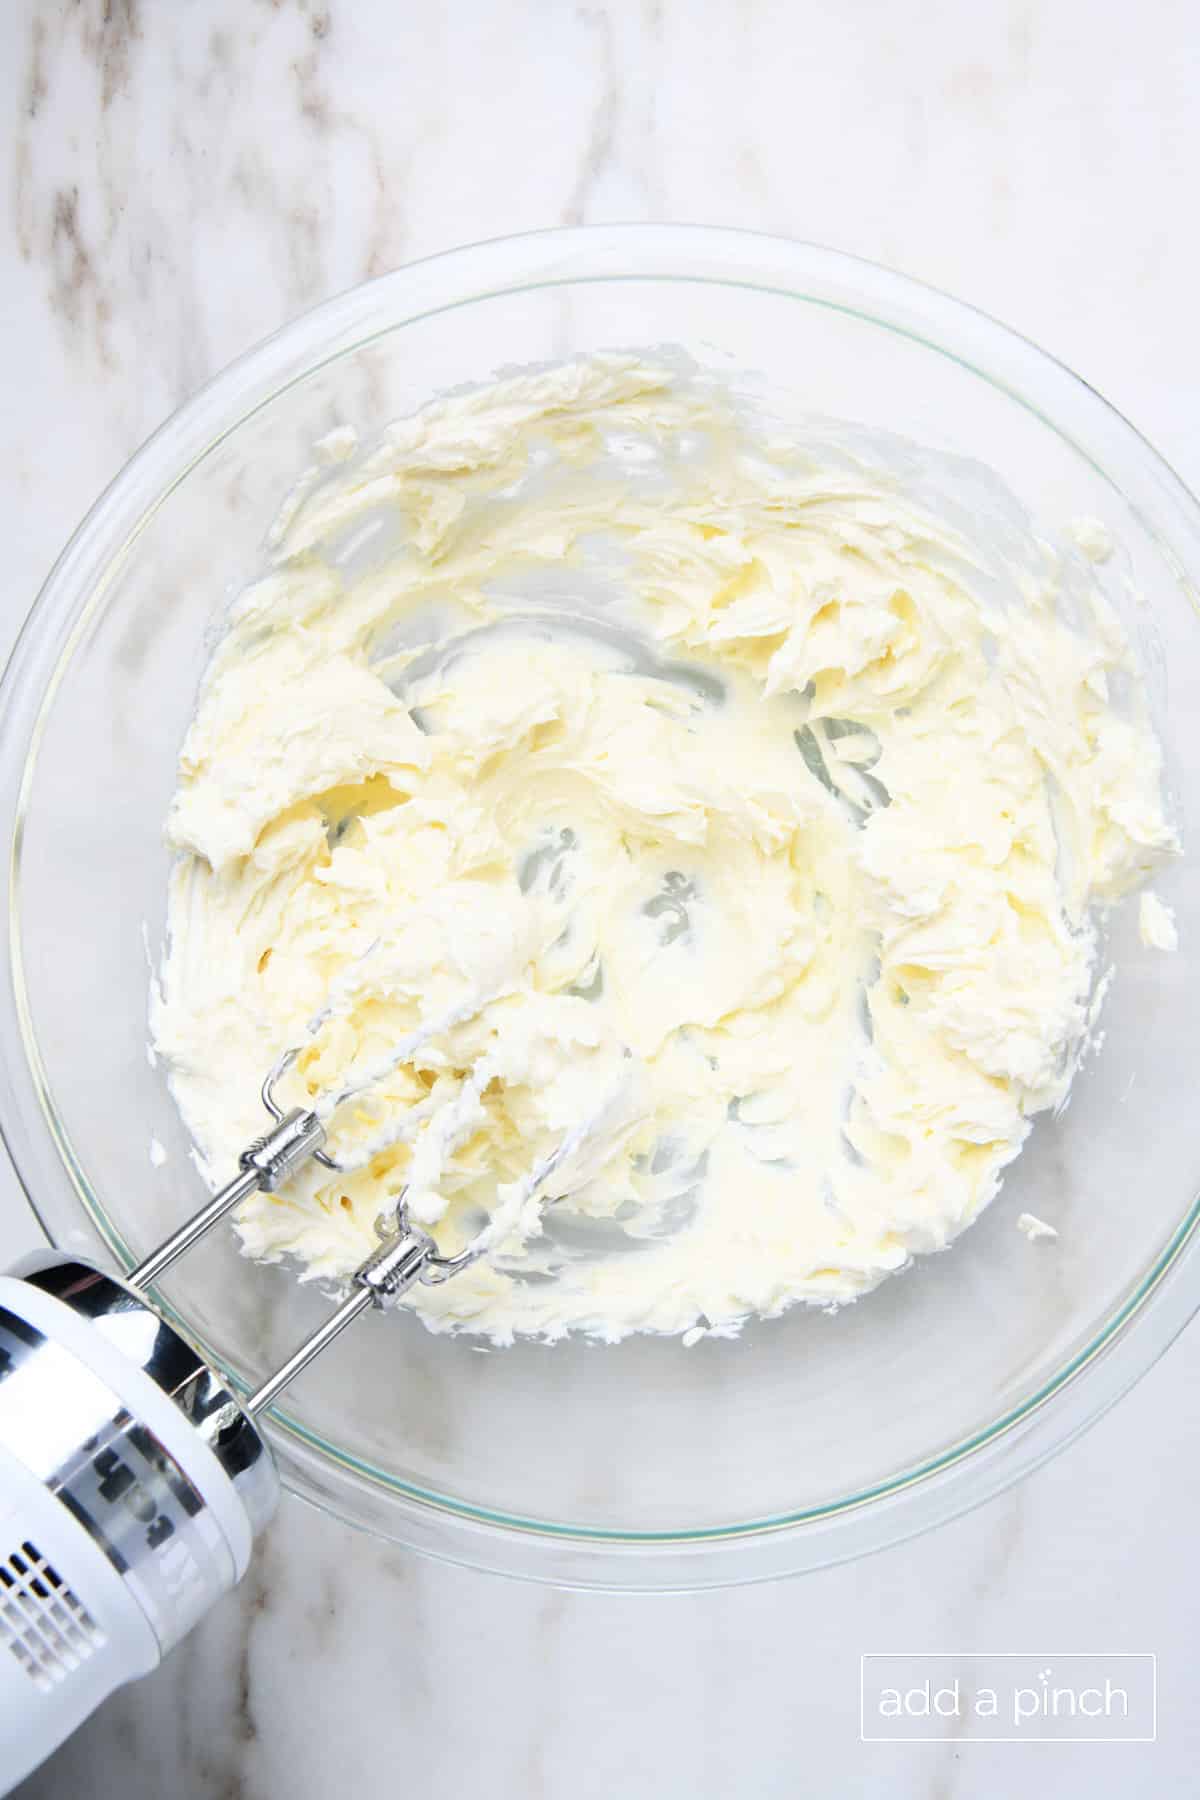 Cream cheese and butter are creamed together with hand mixer in glass mixing bowl.